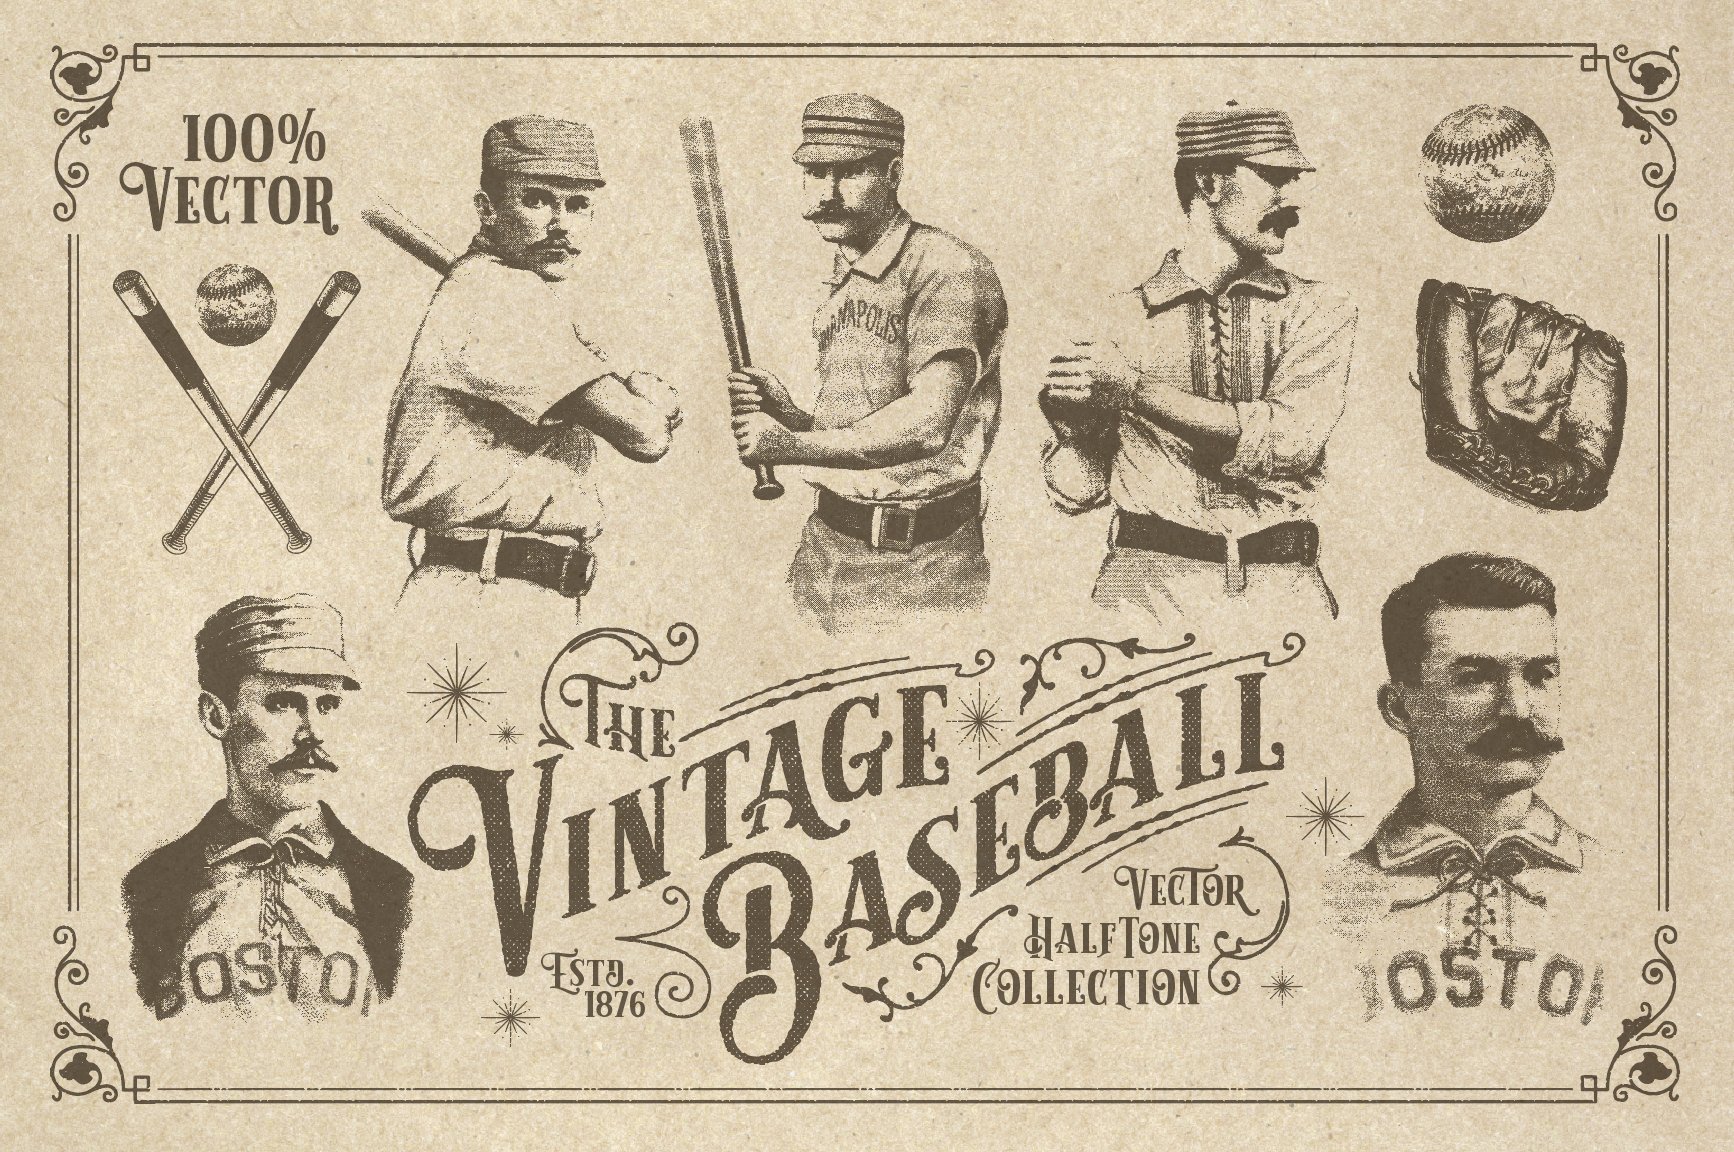 Some baseball illustrations on an old brown paper.